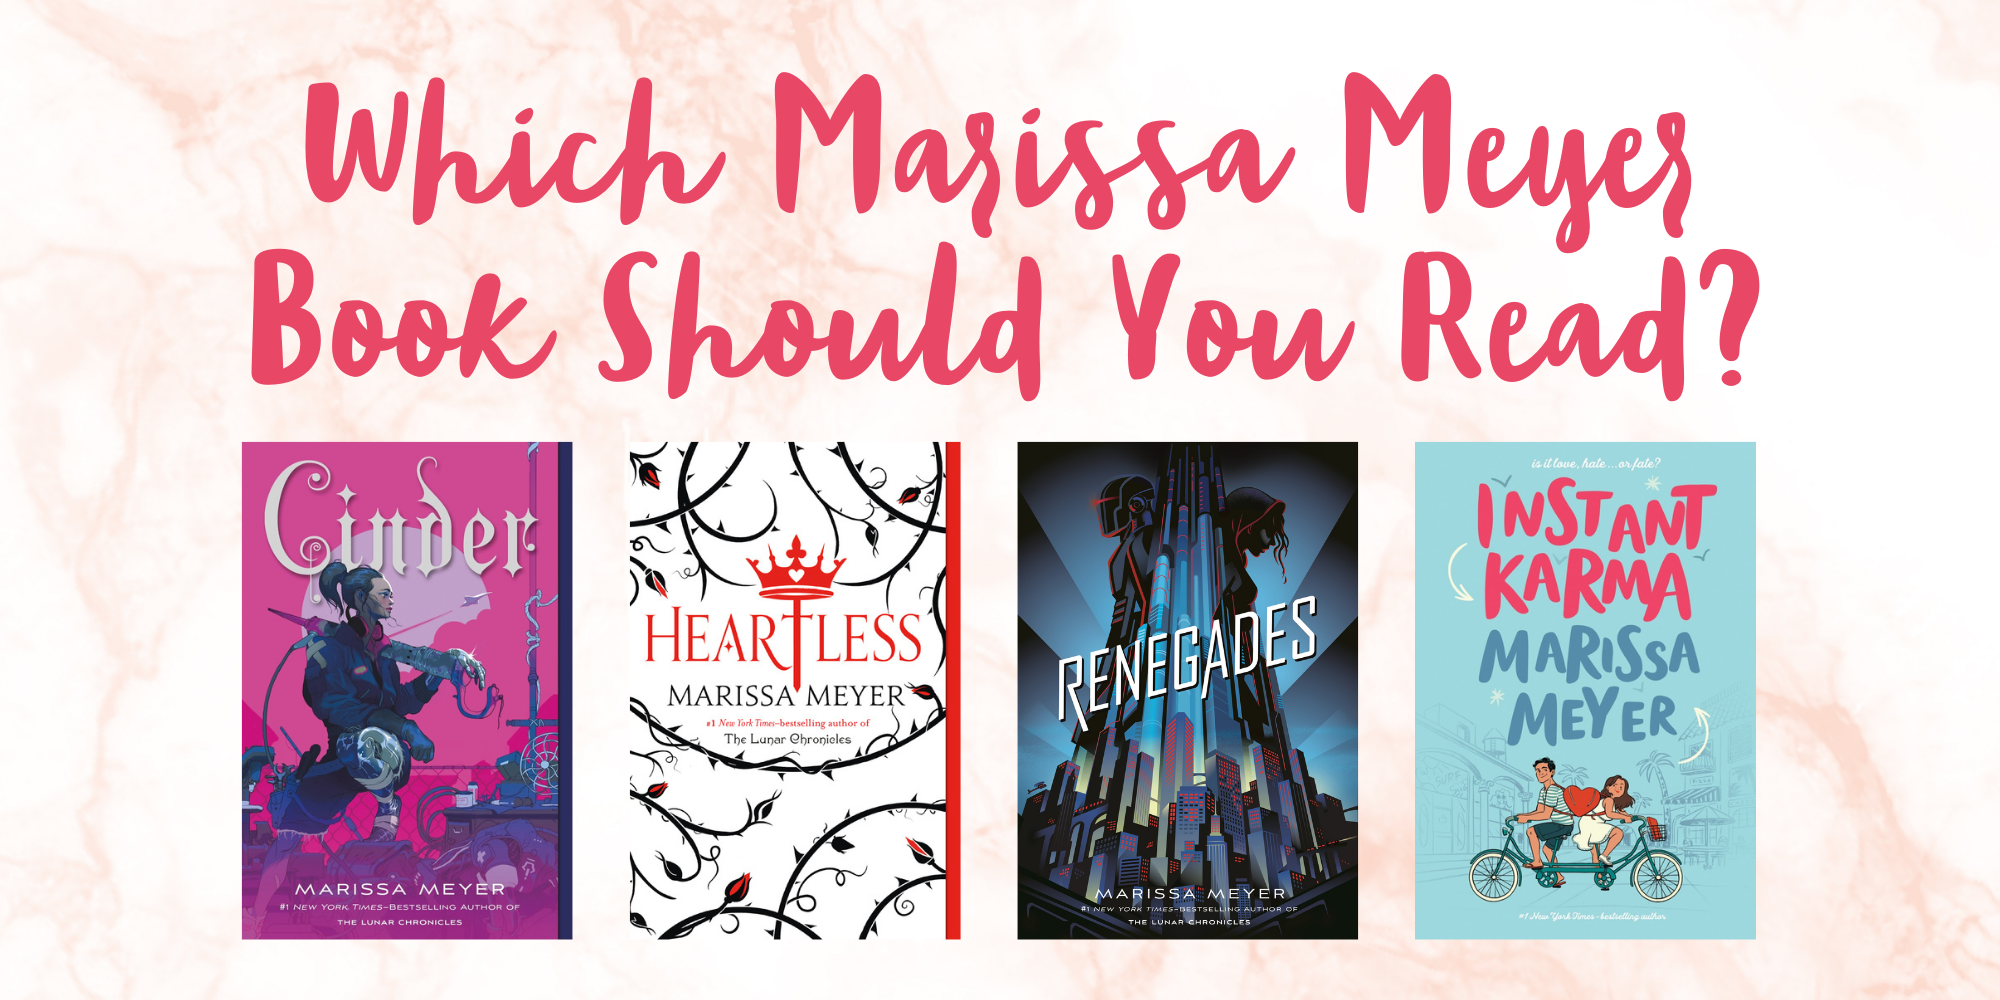 Which Marissa Meyer Book Should You Read?